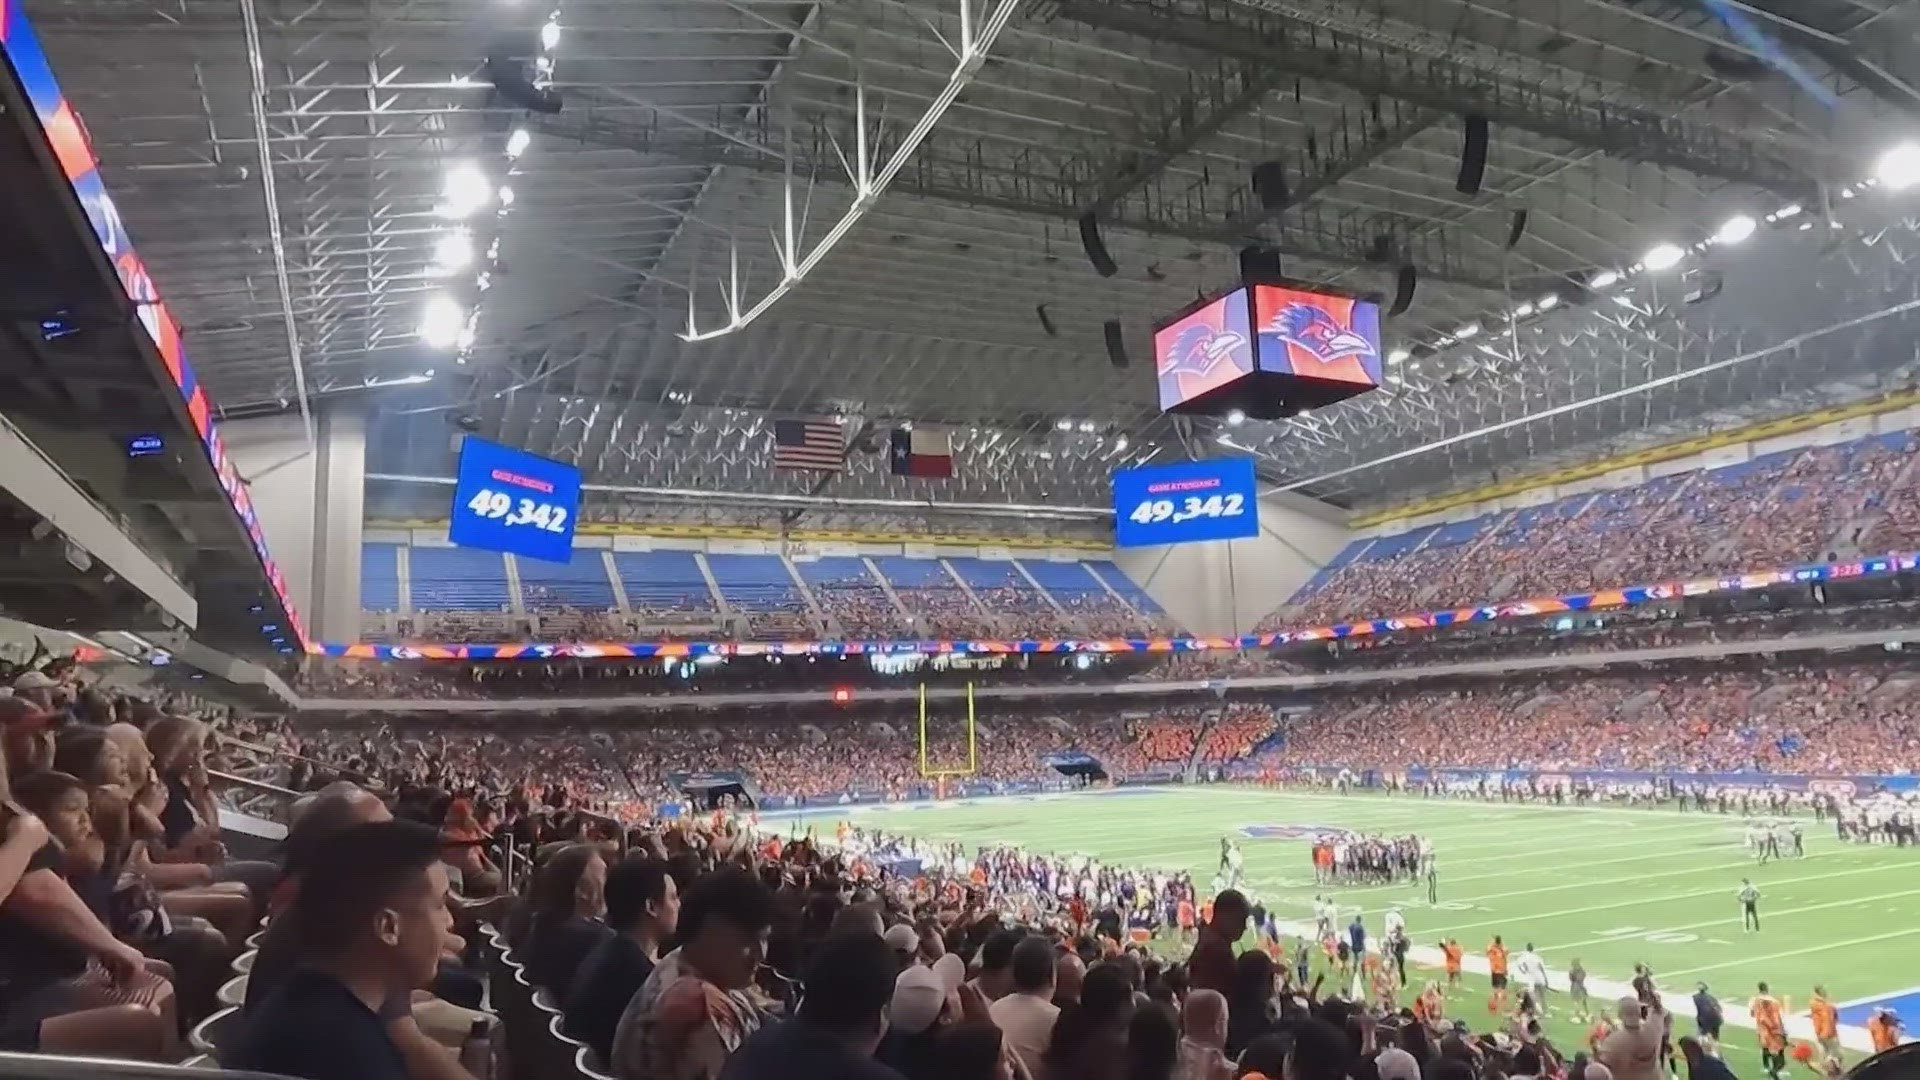 Nearly 50,000 fans packed the dome, making it the second biggest crowd in UTSA history.